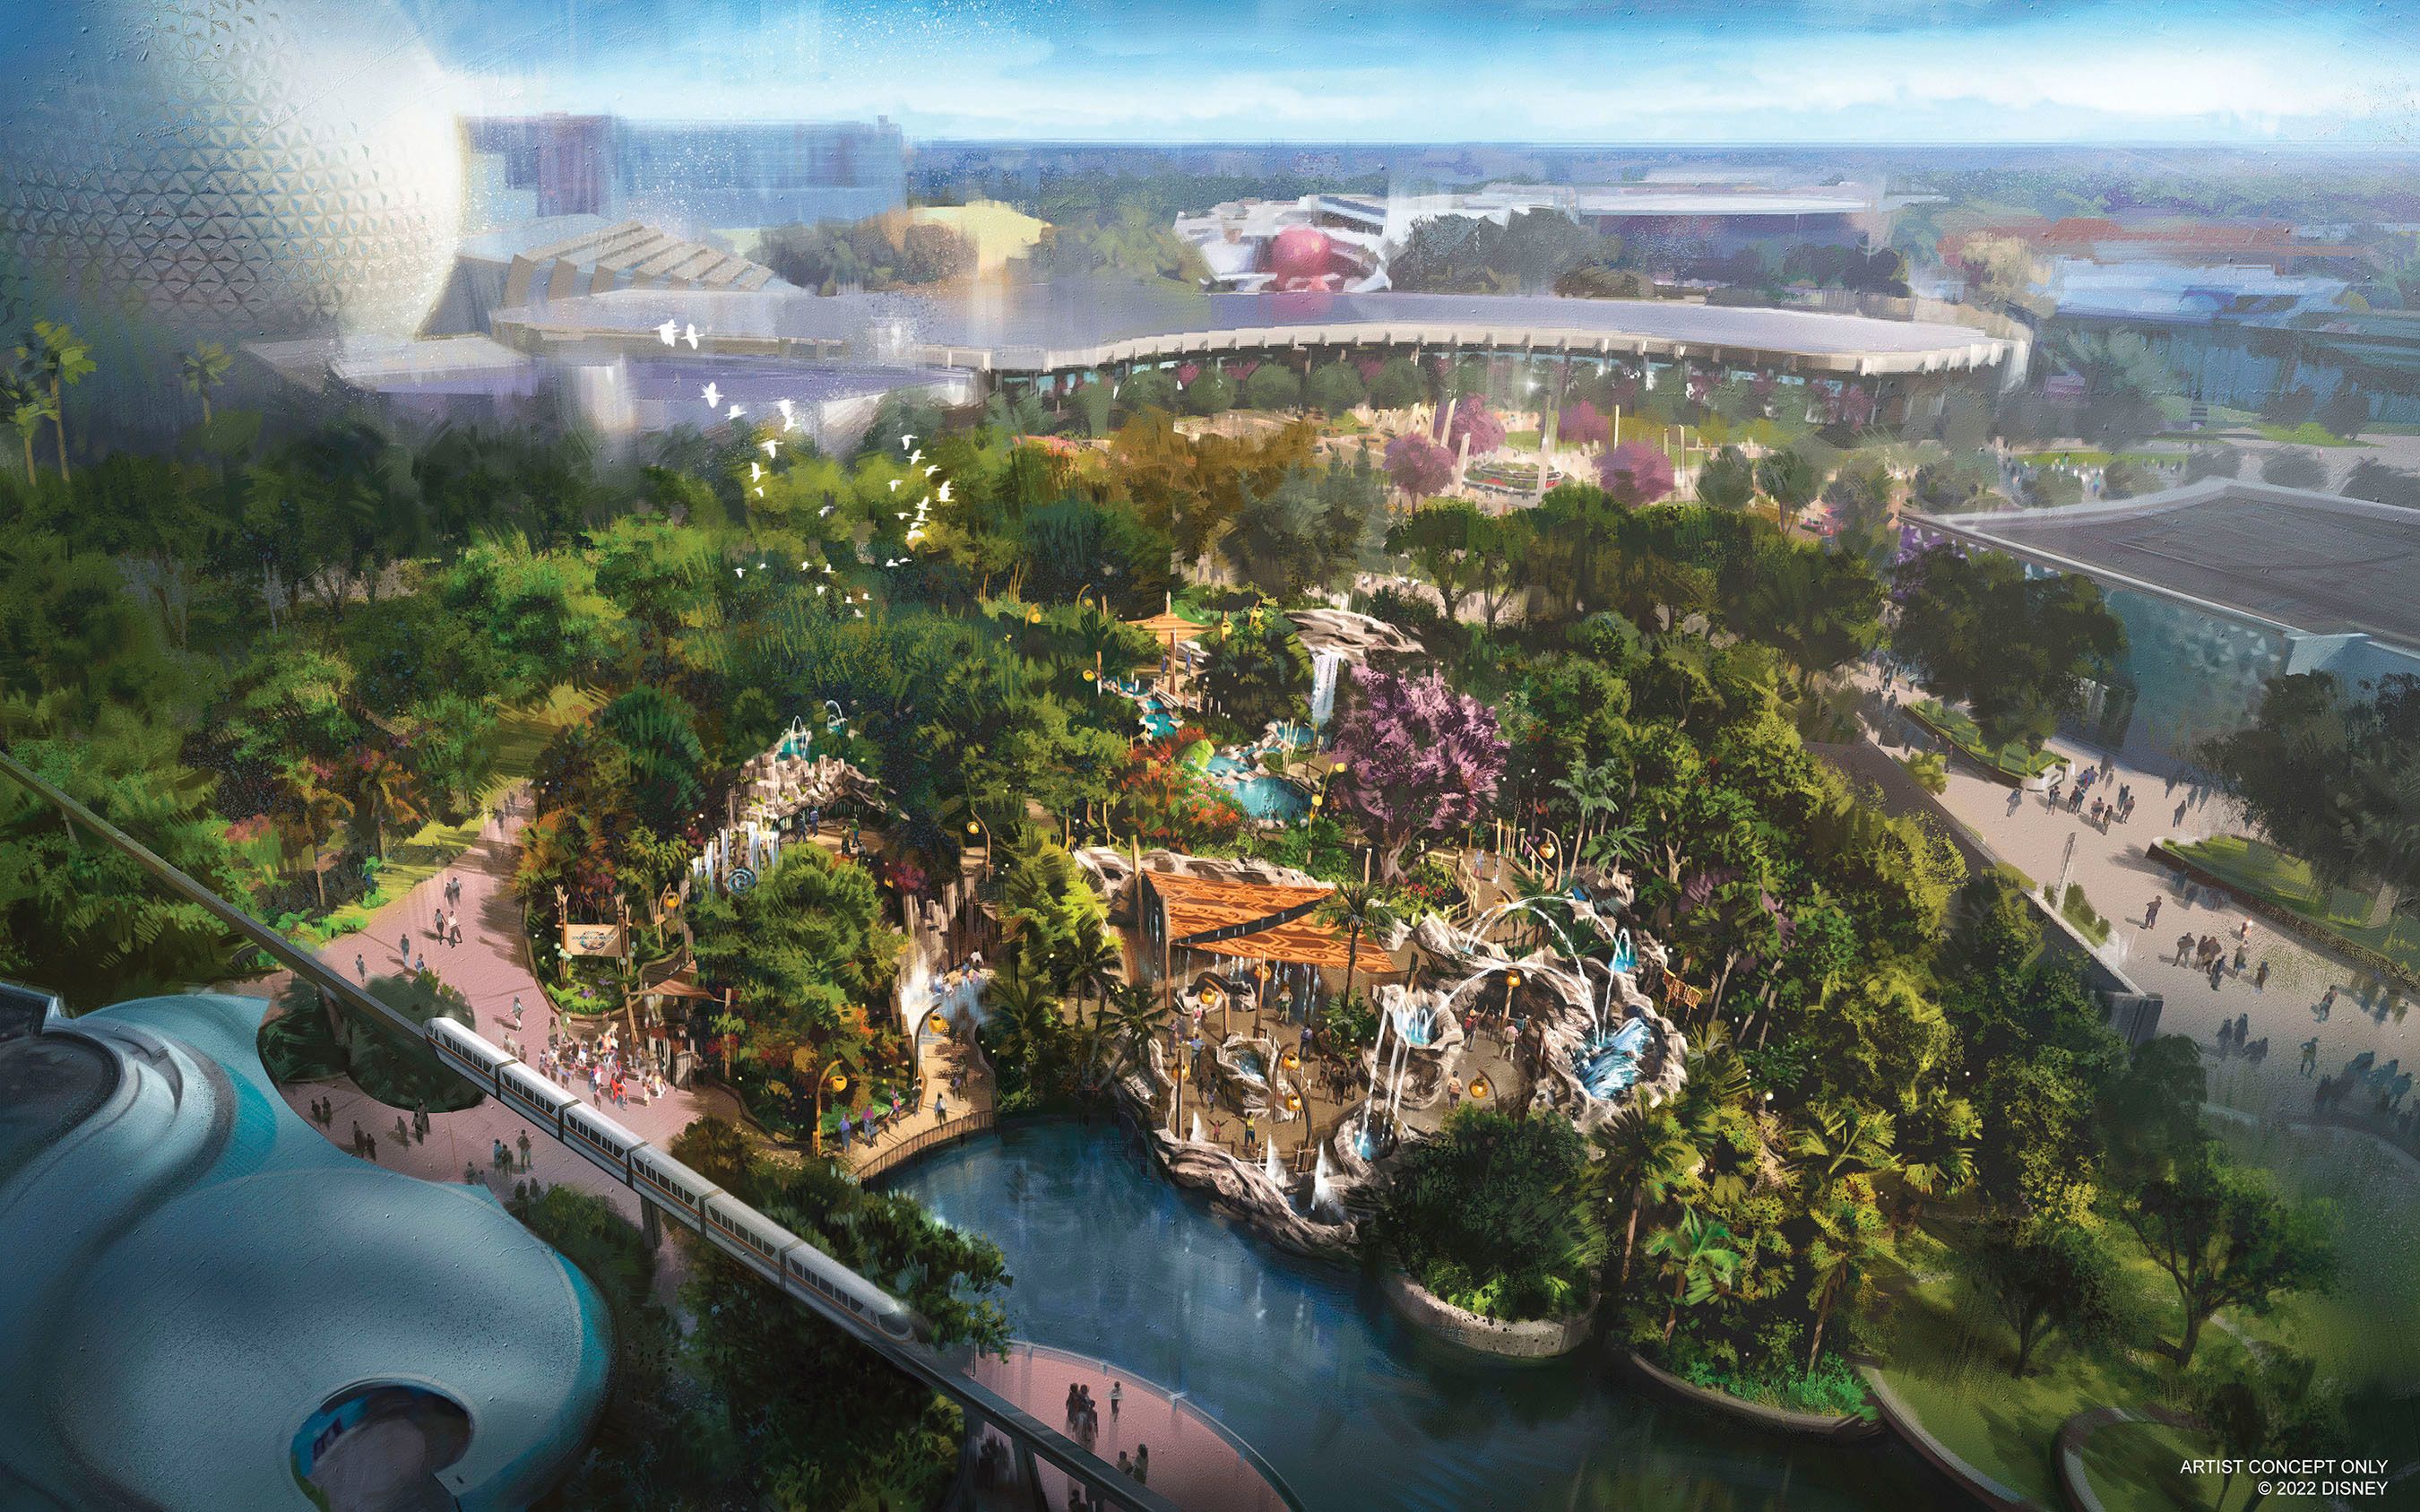 Universal Announces Plans for New Theme Park in Texas — What We Know So Far